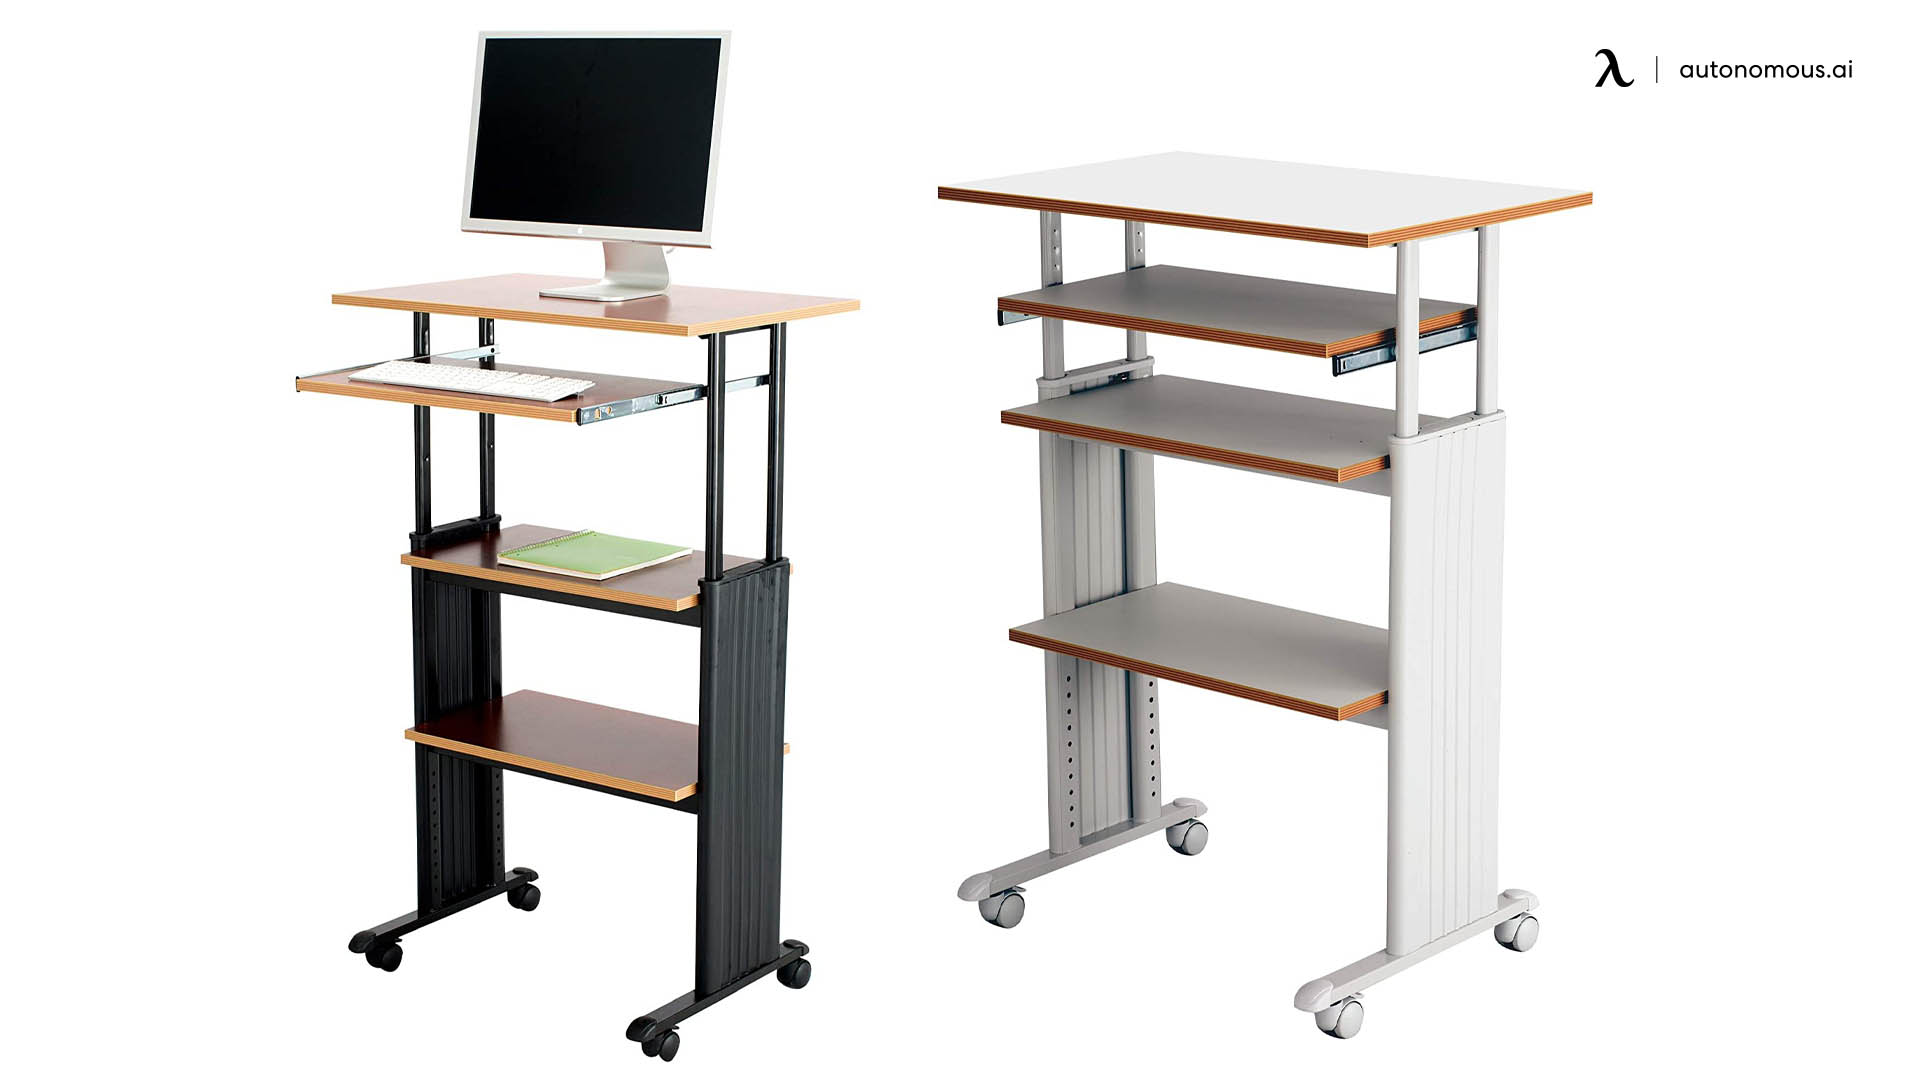 Safco Muv Stand Up Desk